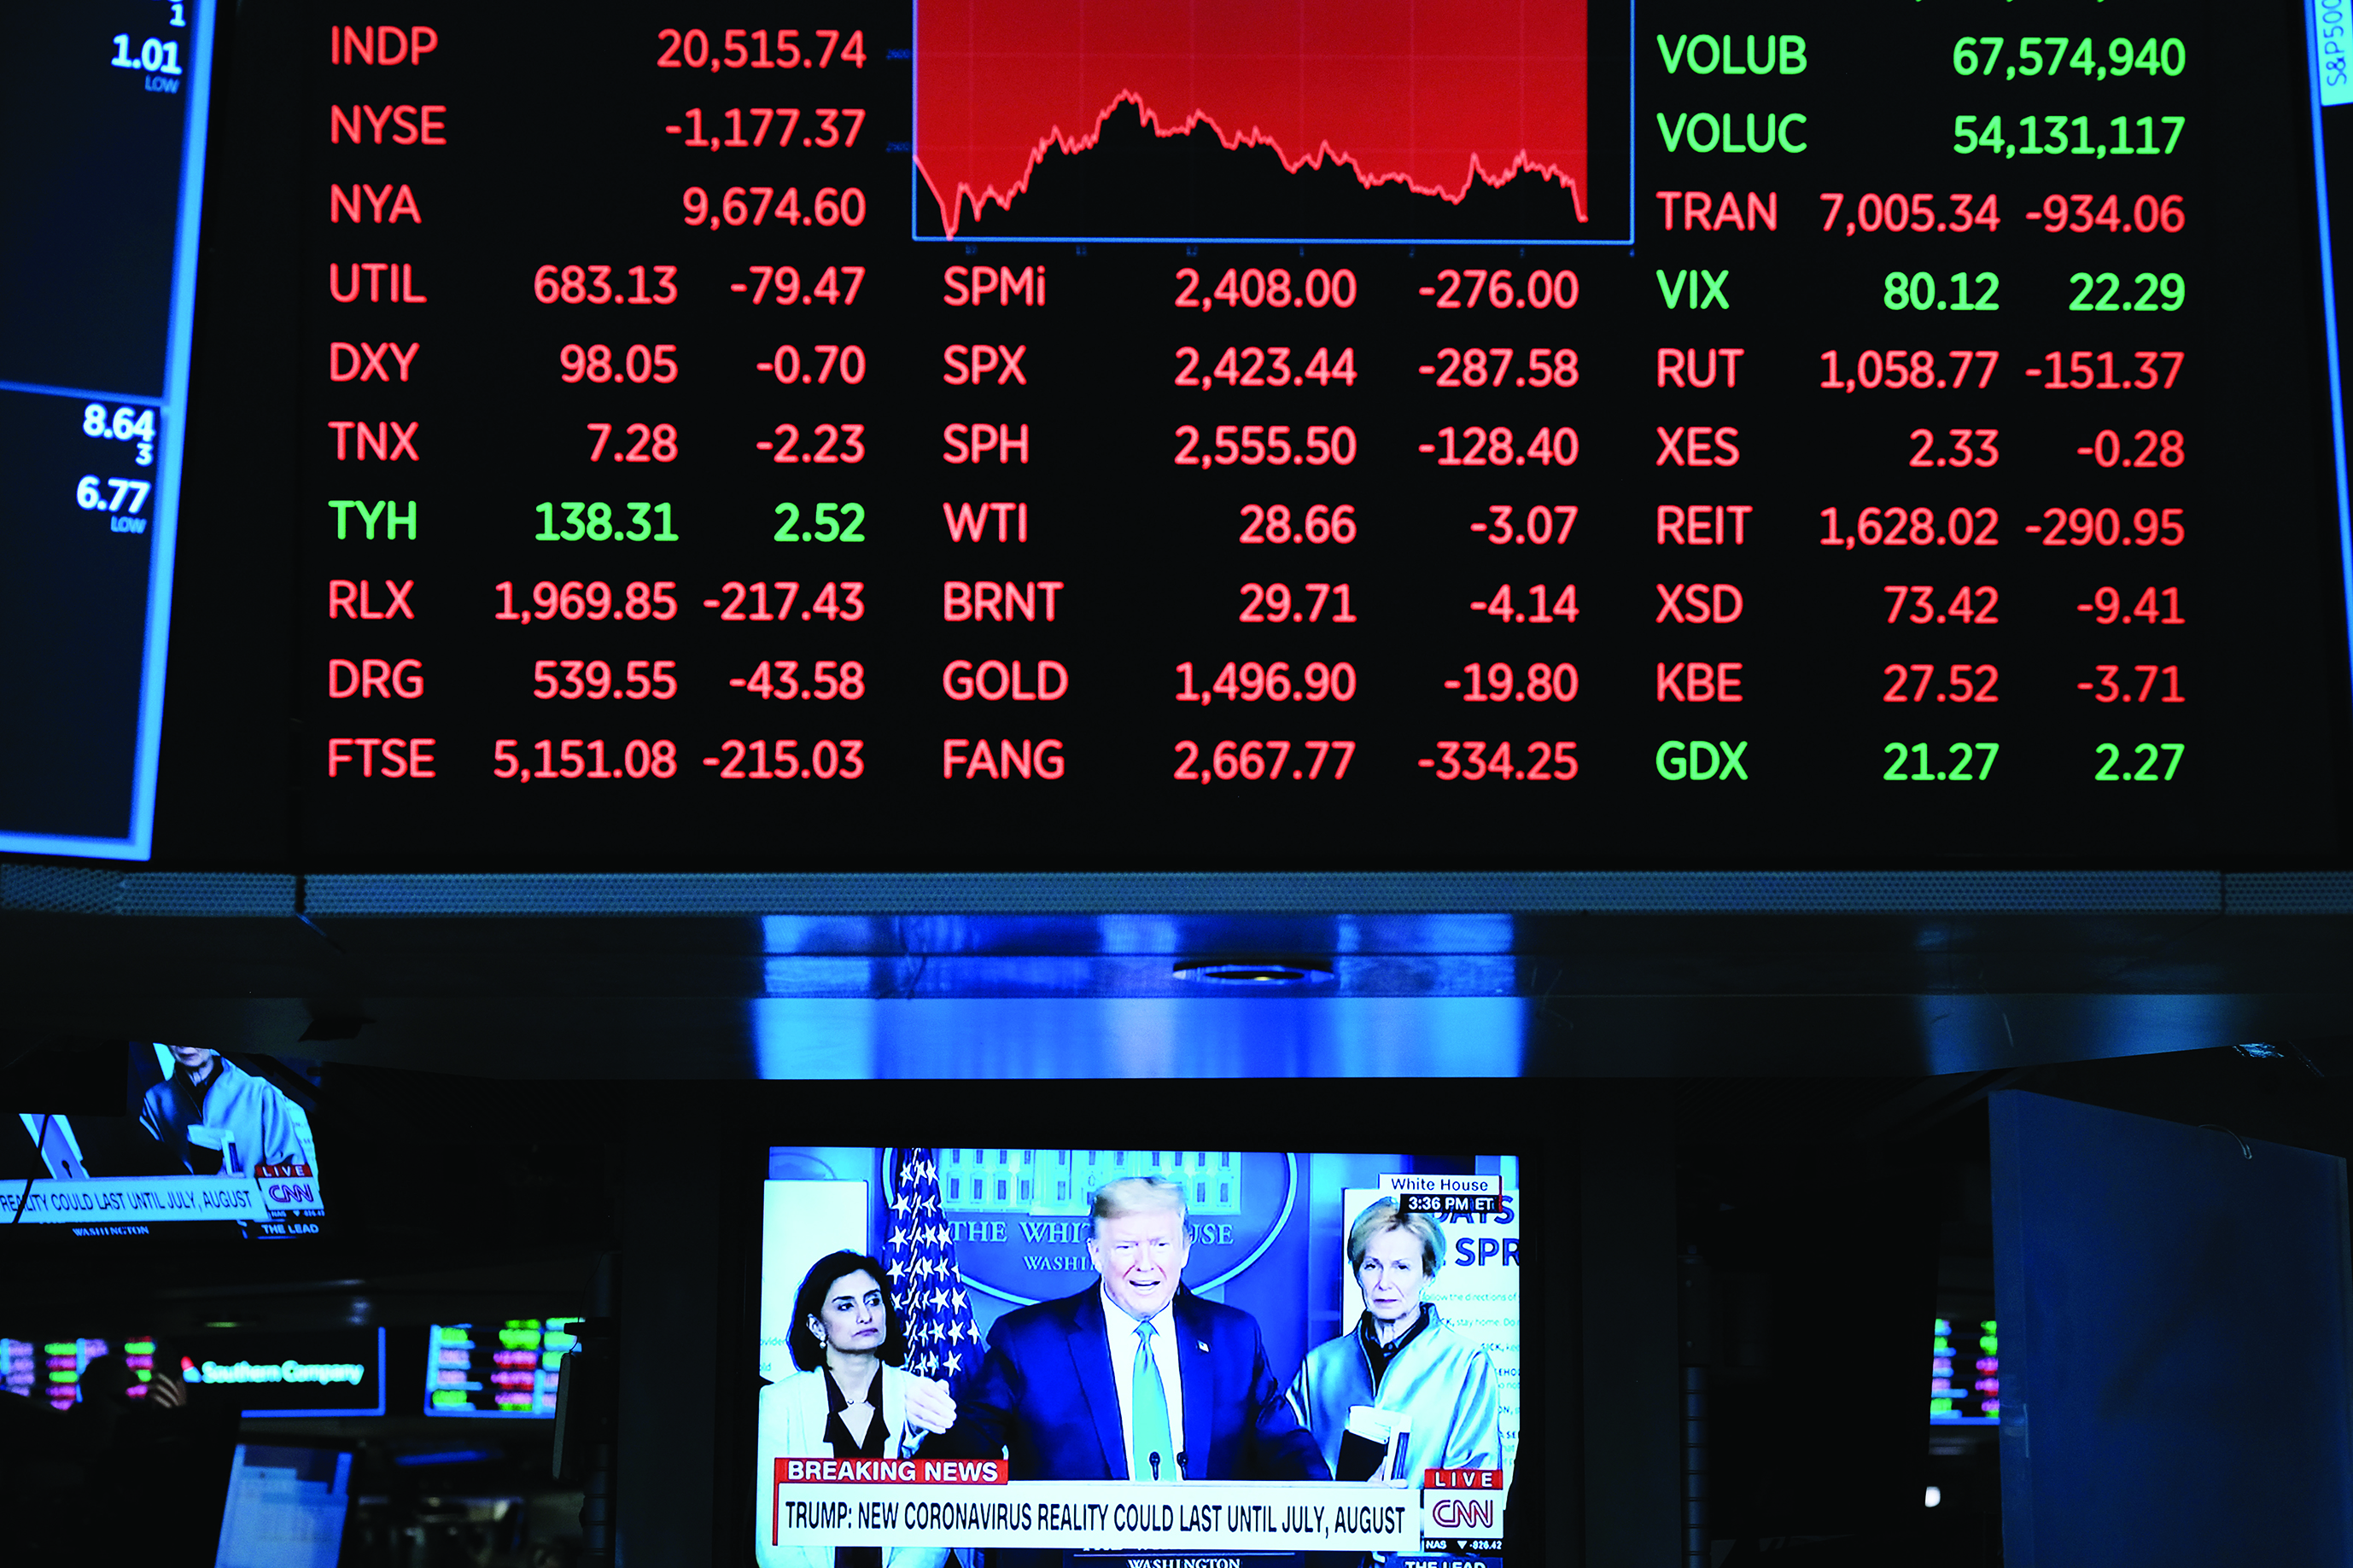 NEW YORK, NEW YORK - MARCH 16: President Trump is displayed on a television on the floor of the New York Stock Exchange (NYSE) on March 16, 2020 in New York City. Stocks again fell sharply on Wall Street despite a drop in interest rates as the nation grapples with the spreading coronavirus outbreak.   Spencer Platt/Getty Images/AFP